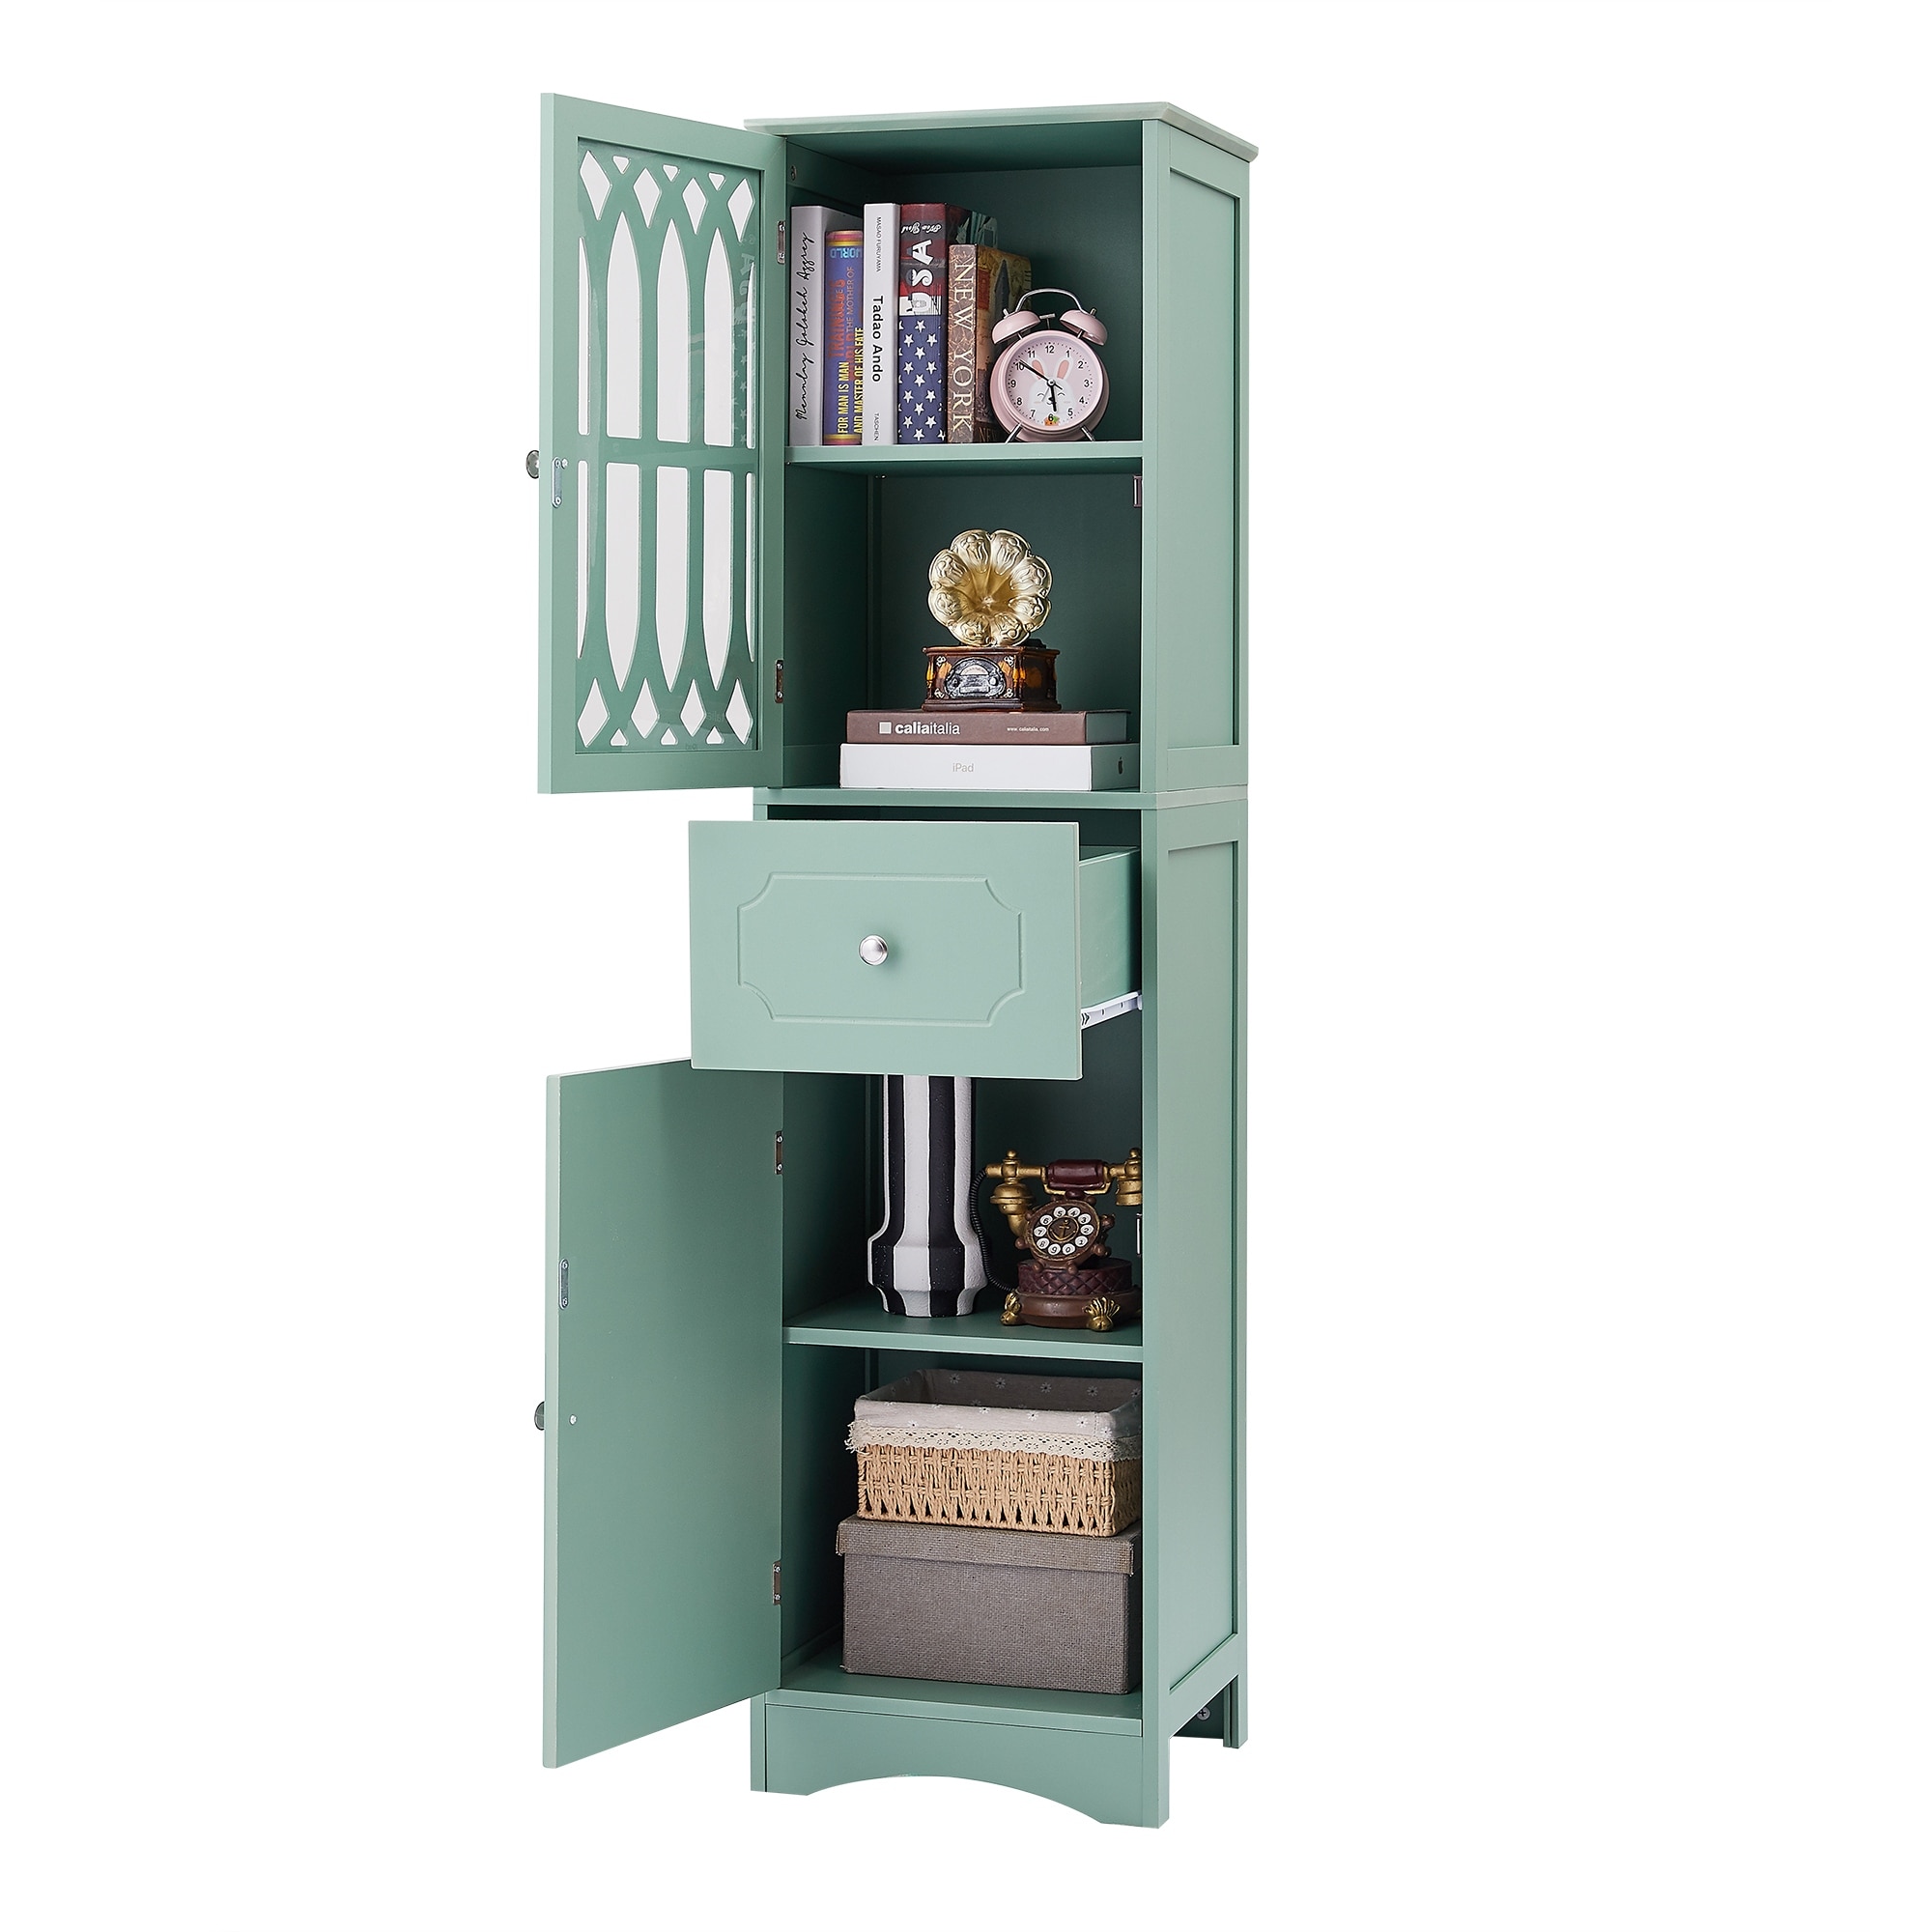 https://ak1.ostkcdn.com/images/products/is/images/direct/047e9c21413ce9591de921f6204ebb4d7d76e220/Tall-Bathroom-Cabinet%2C-Freestanding-Storage-Cabinet-with-Drawer-and-Doors%2C-MDF-Board%2C-Adjustable-Shelf.jpg